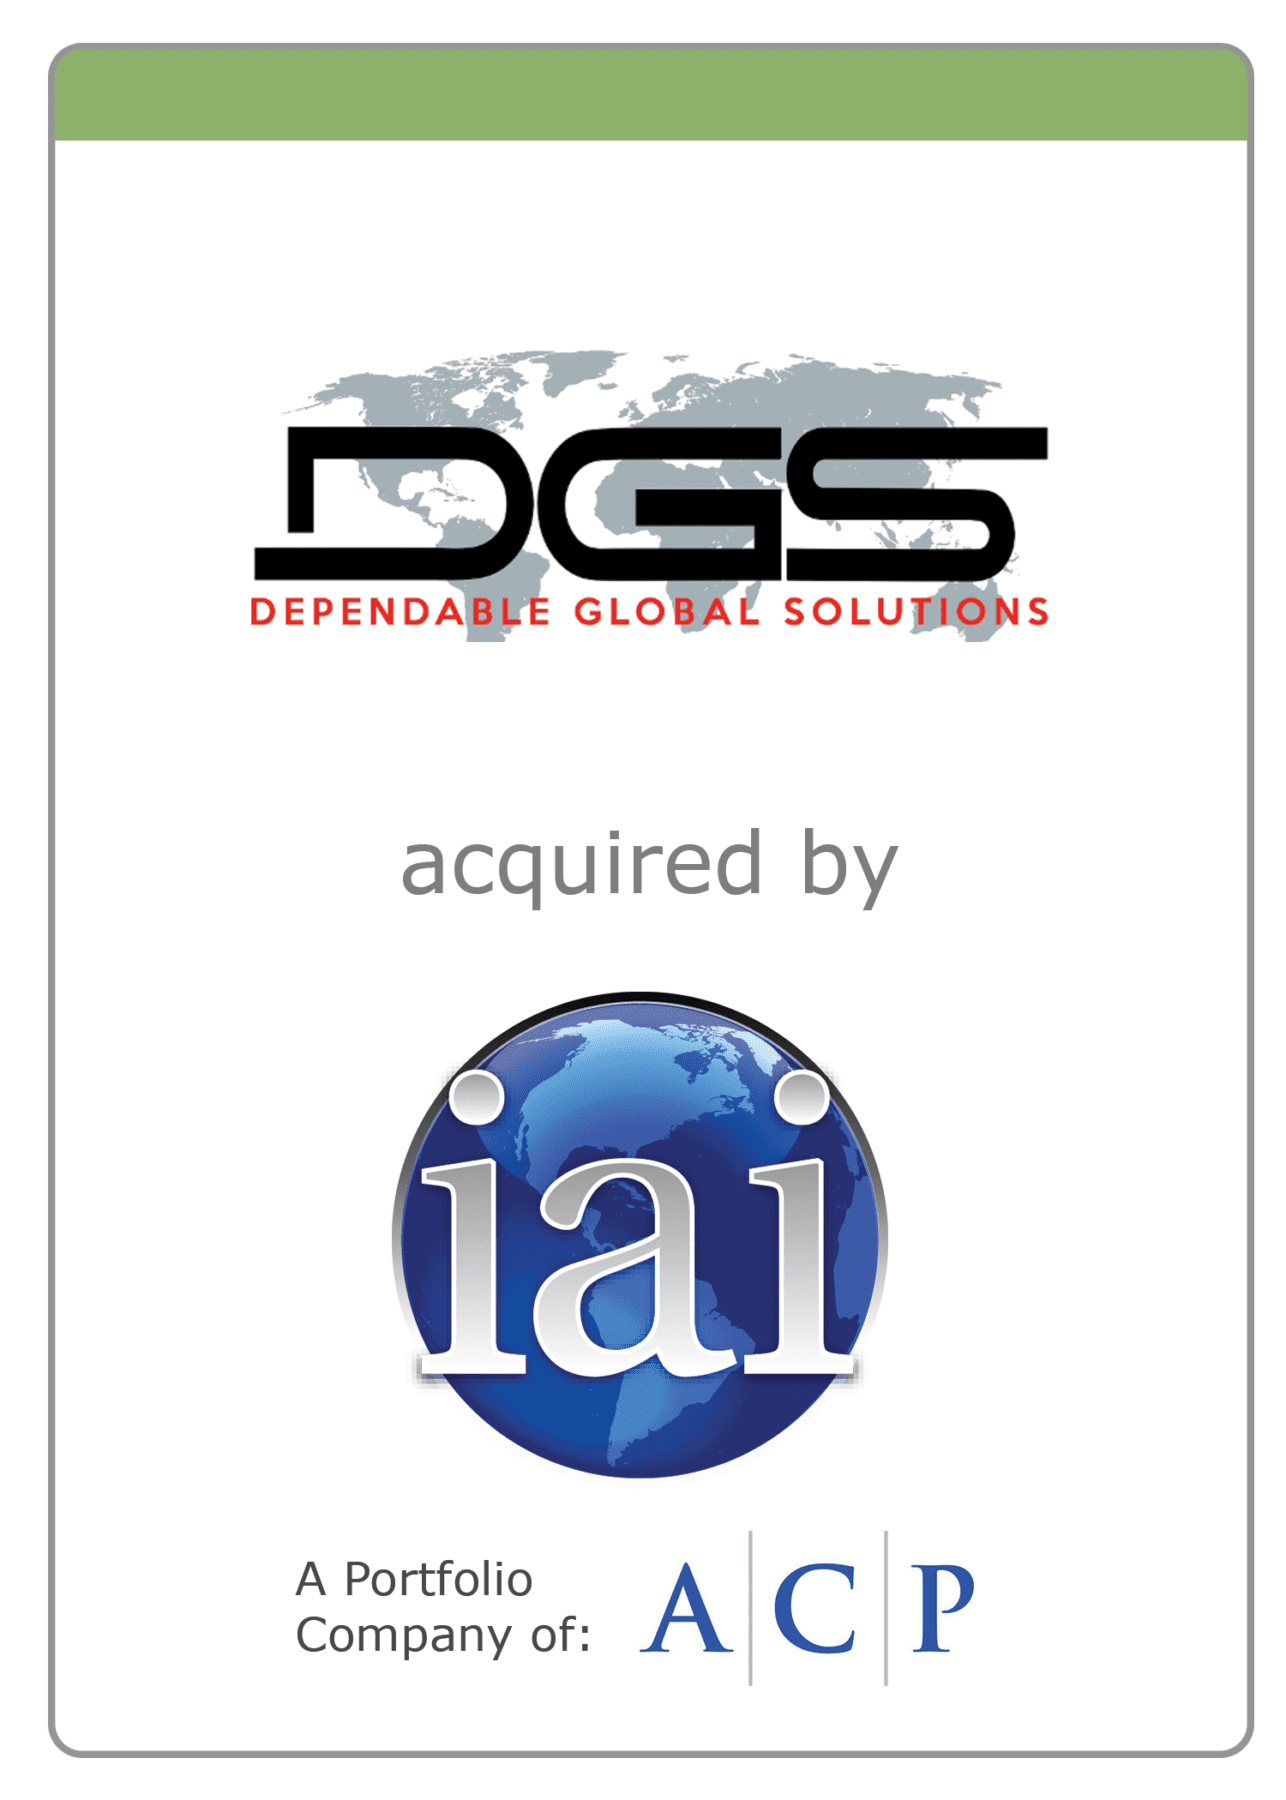 DGS (Dependable Global Solutions) acquired by Integrity Applications Incorporated (IAI) - The McLean Group